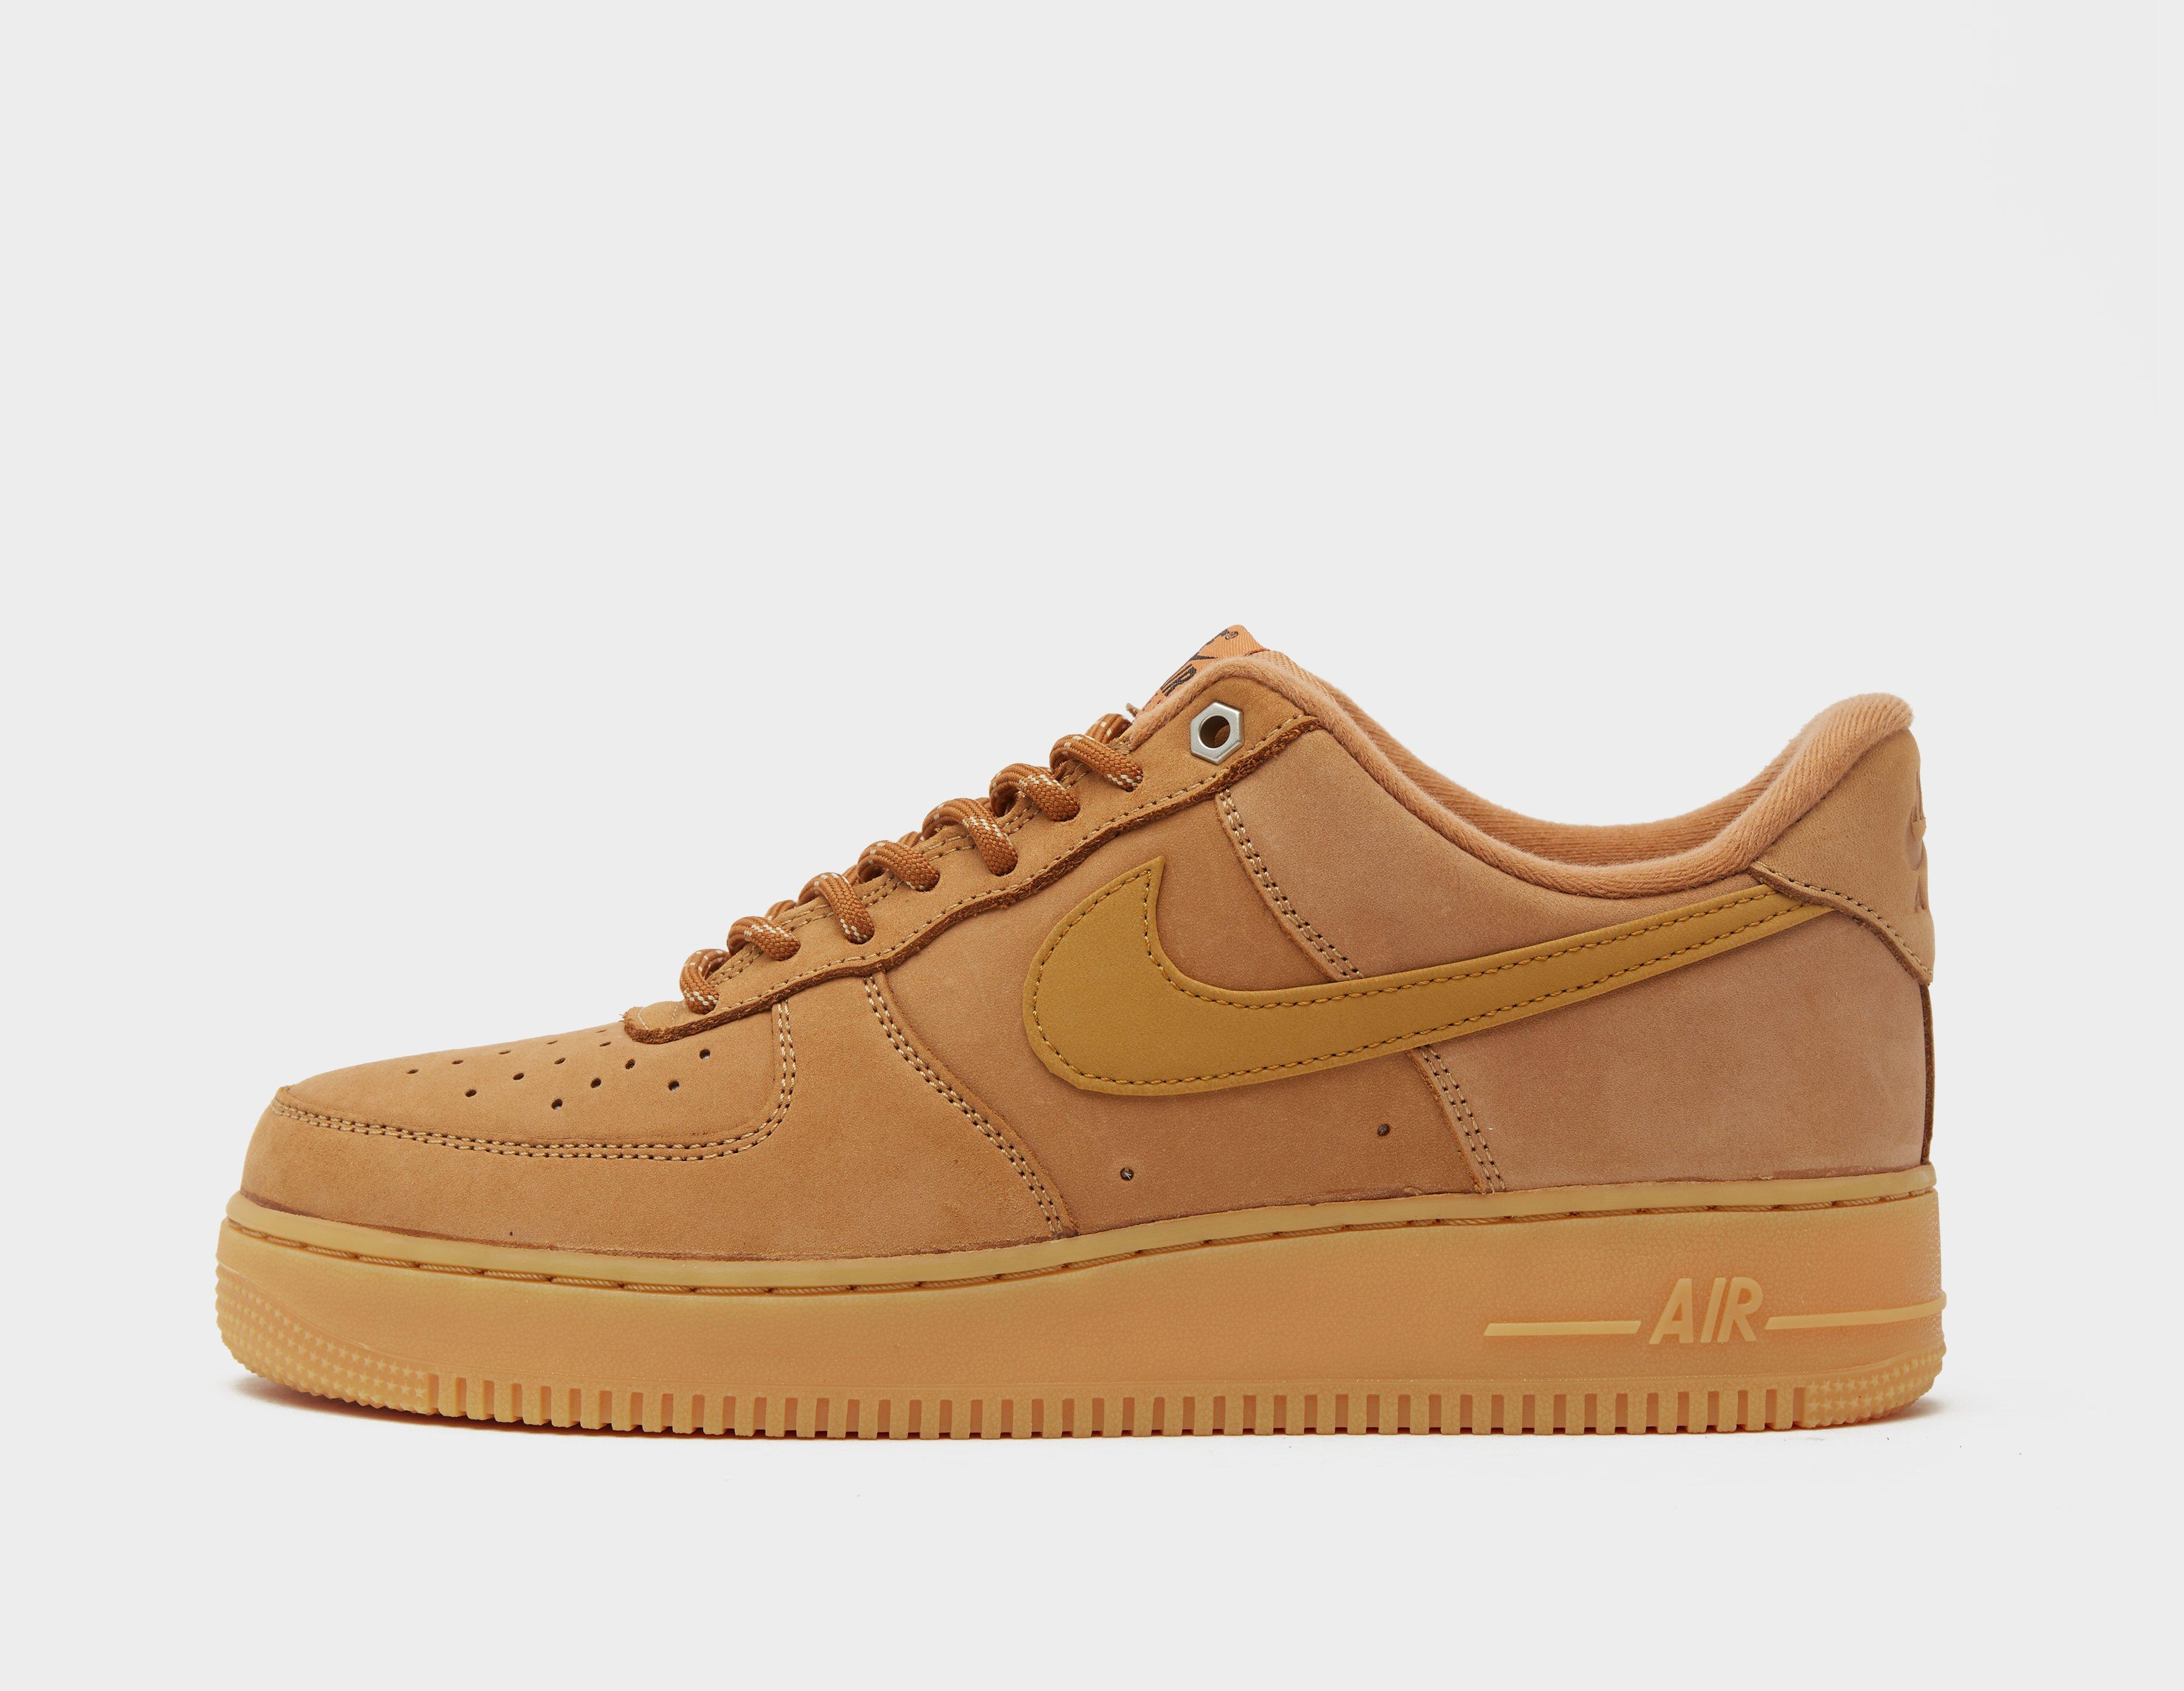 NIKE Air Force 1 '07 Basketball Shoes For Men - Buy NIKE Air Force 1 '07  Basketball Shoes For Men Online at Best Price - Shop Online for Footwears  in India